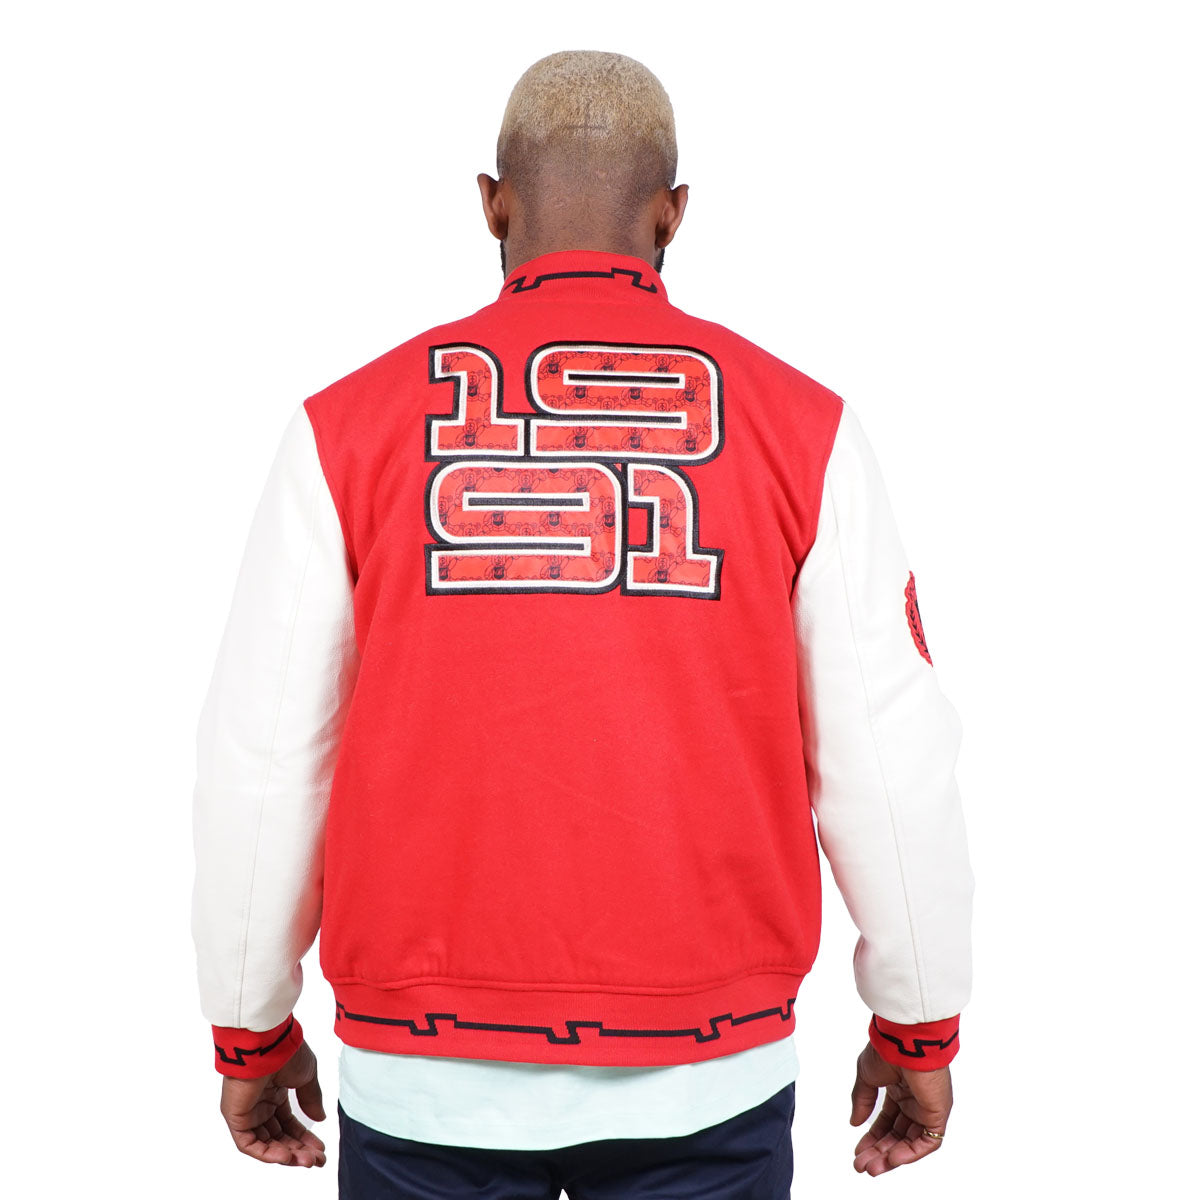 Red variant of the baseball jacket showing the 1991 design stitched into the back